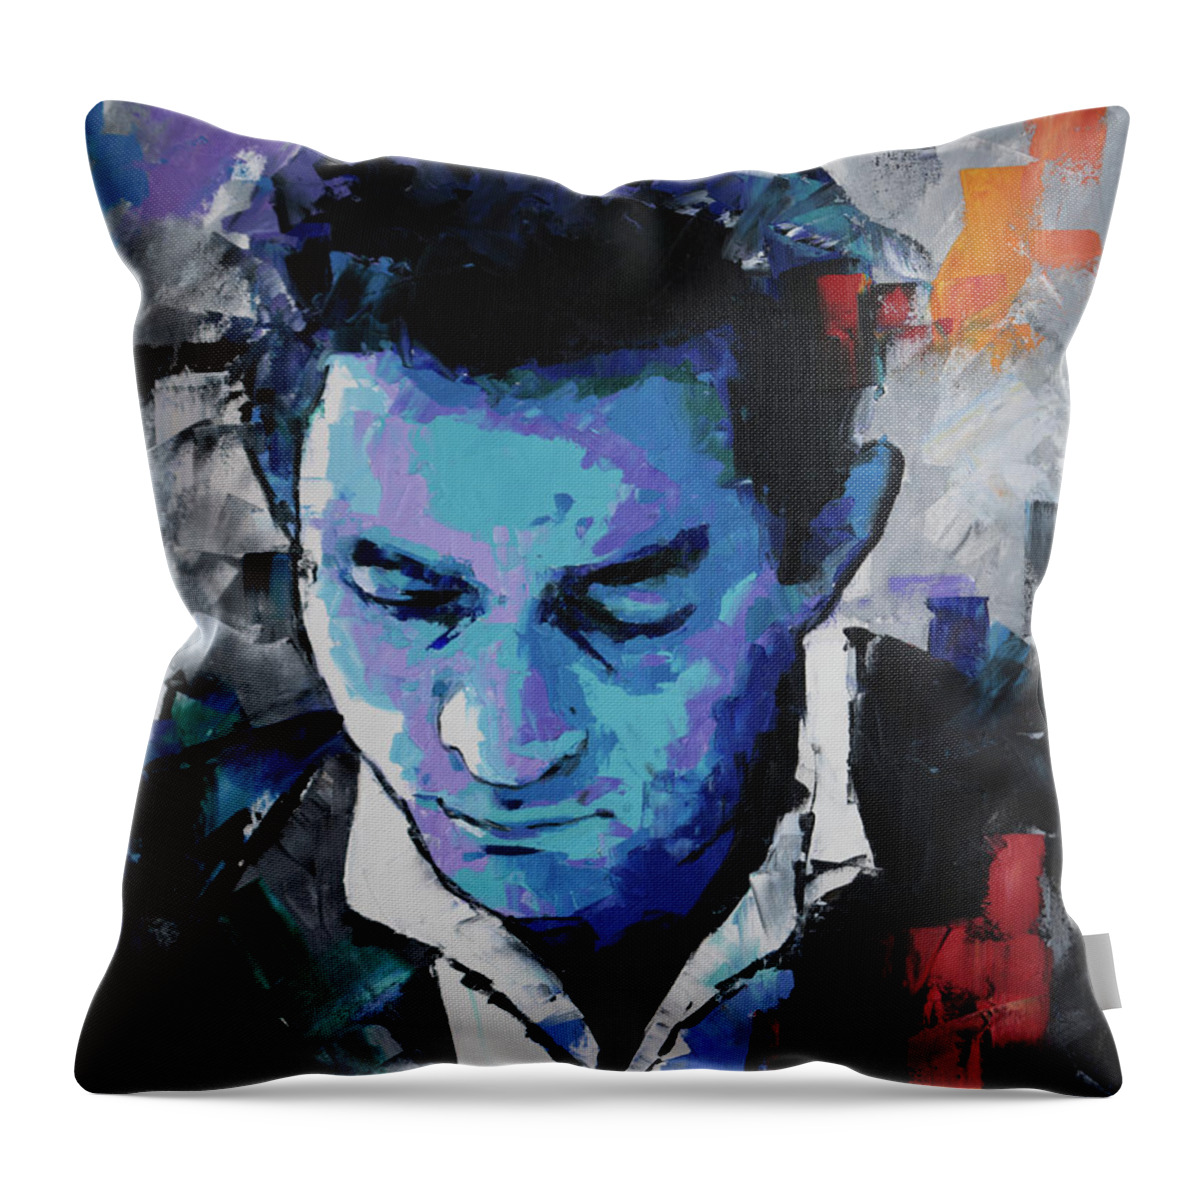 Johnny Cash Throw Pillow featuring the painting Johnny Cash by Richard Day